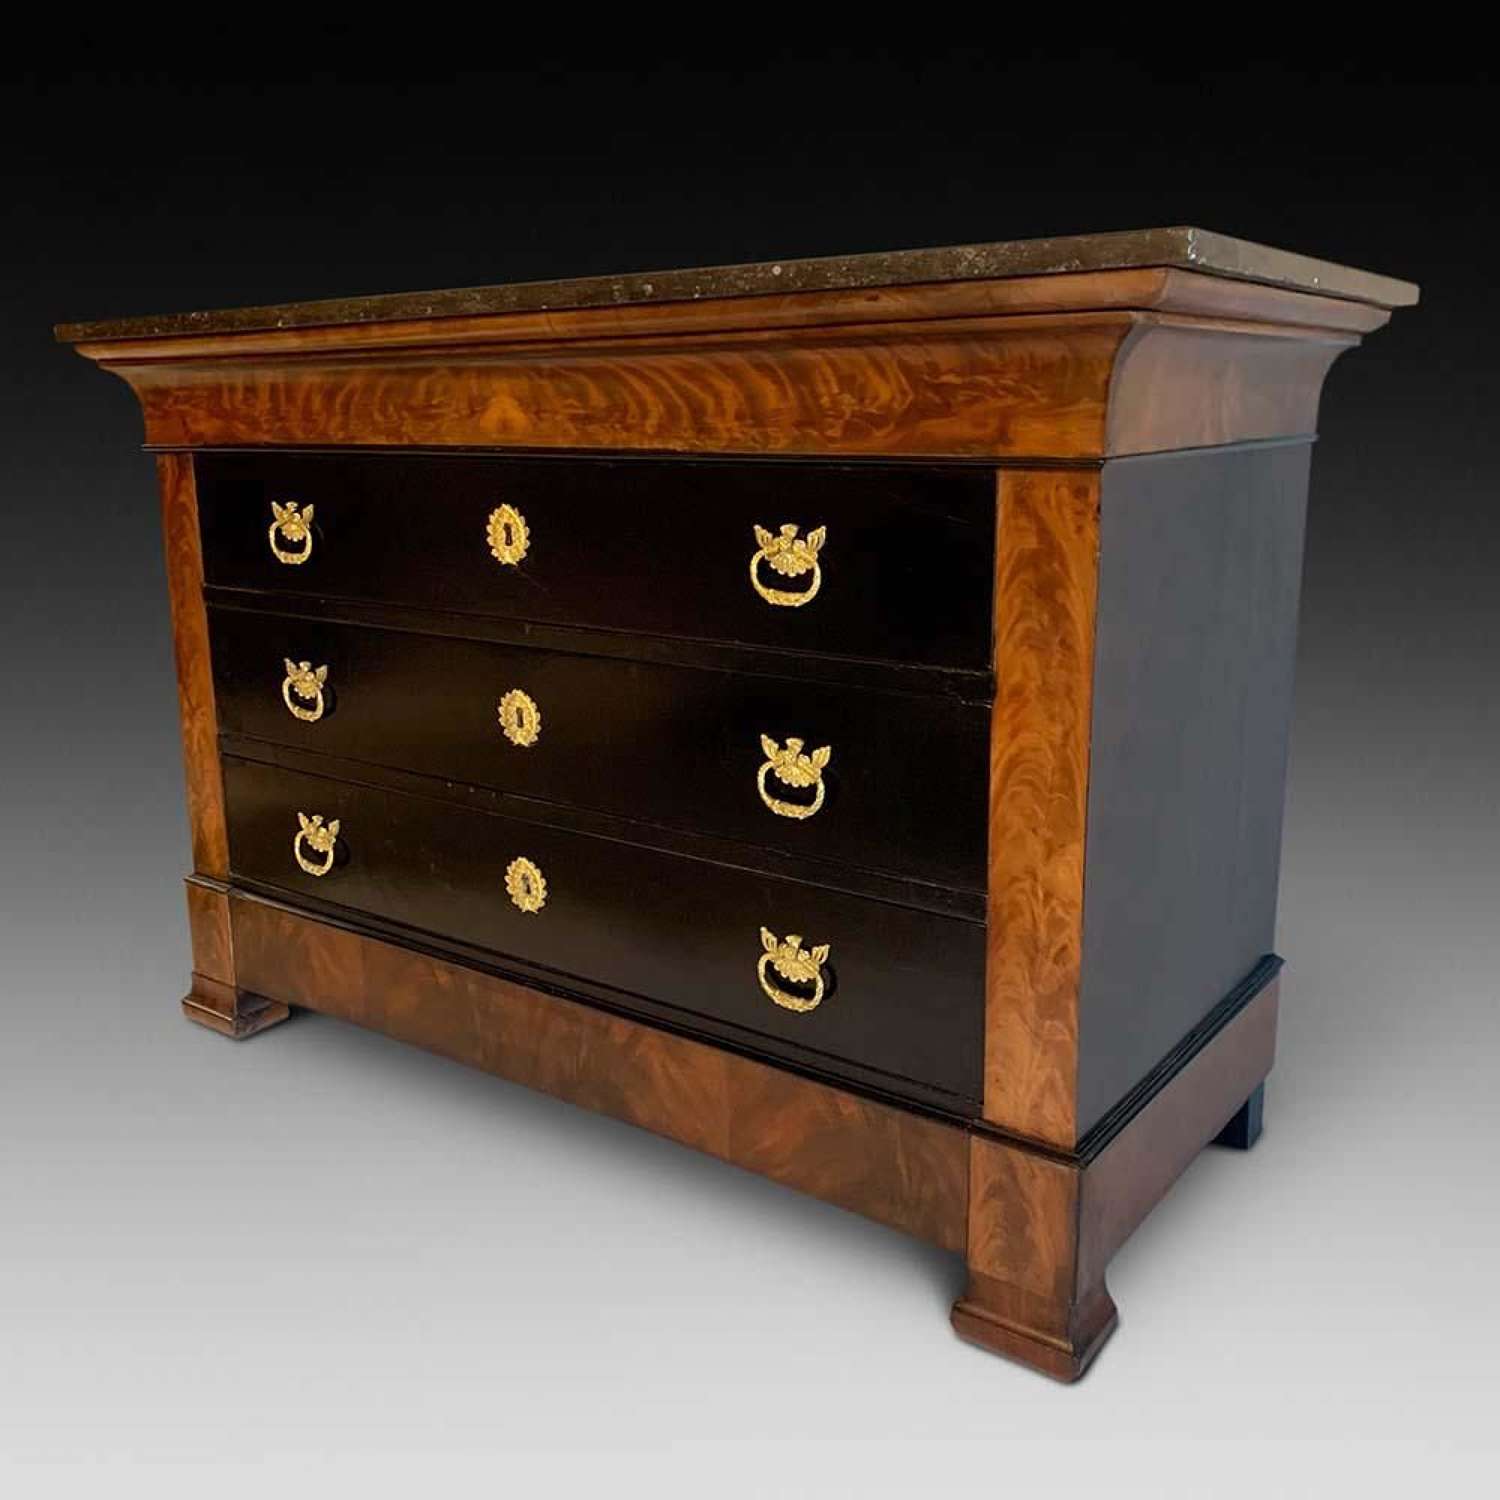 Ebonised Flame Mahogany Commode Chest of Drawers, ca. 1840-60